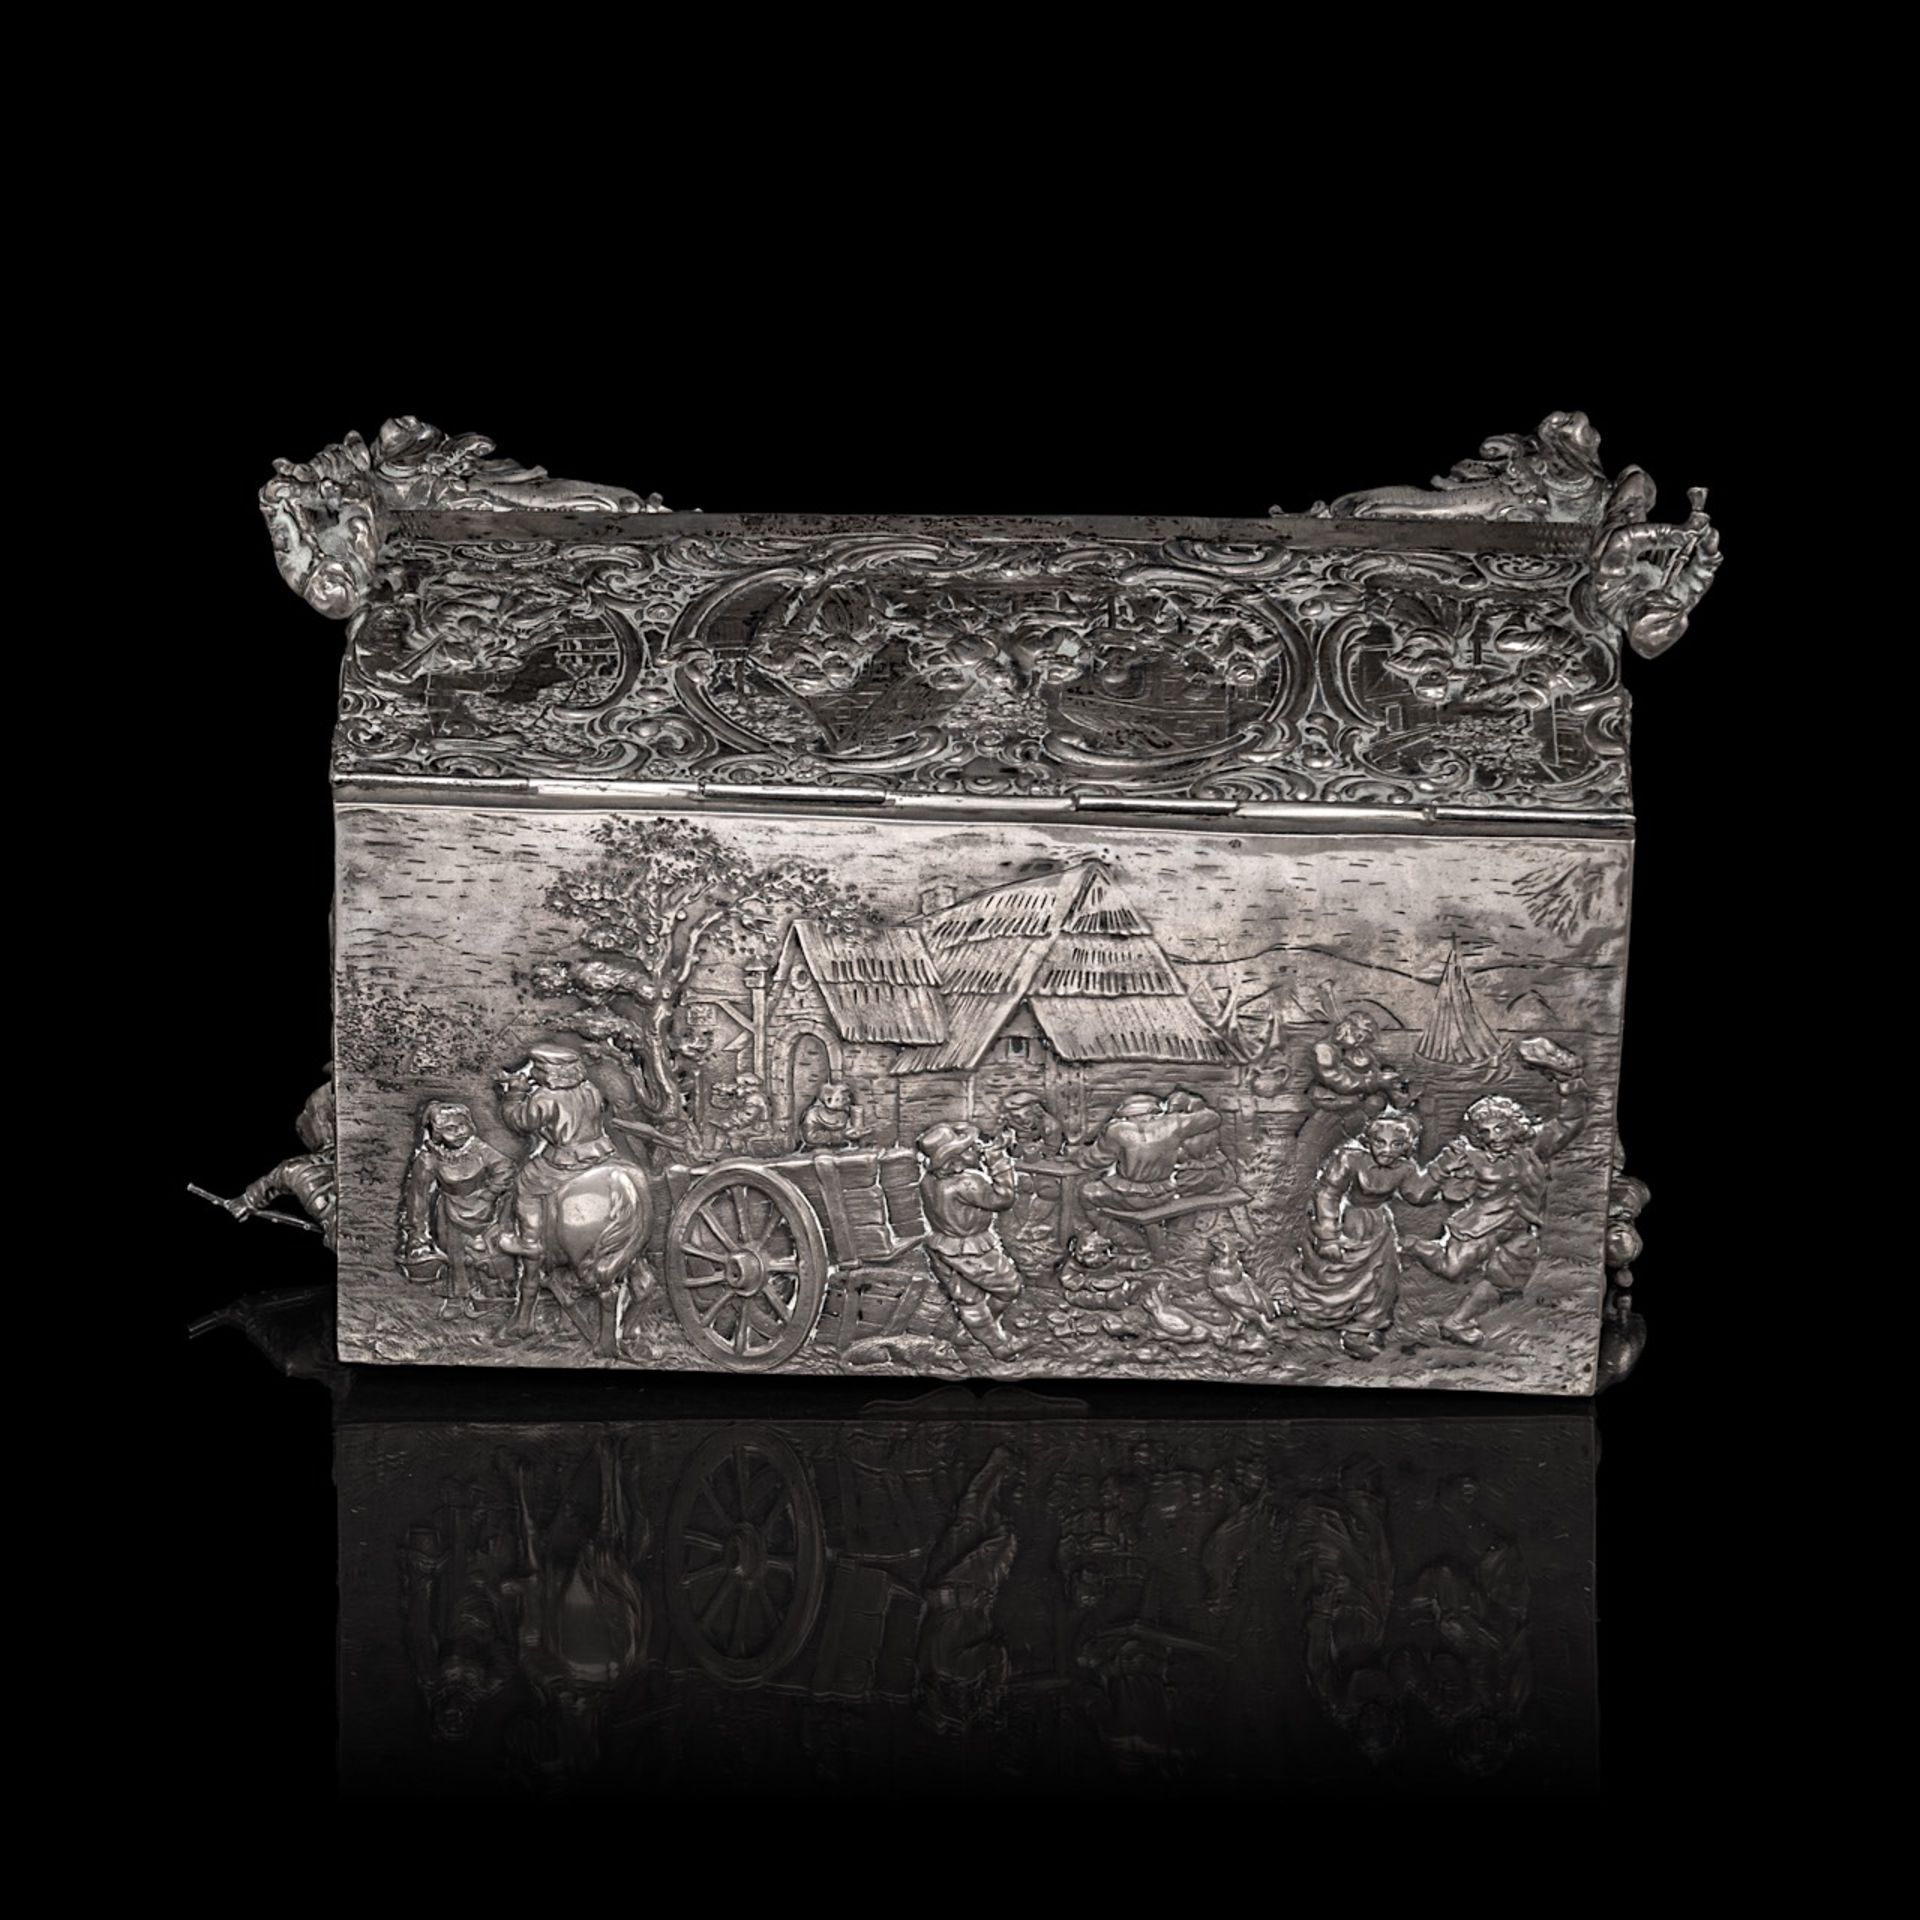 A Baroque Revival German silver jewellery casket, (1888-present), 800/000, weight ca: 1312 g 14.5 x - Image 6 of 9